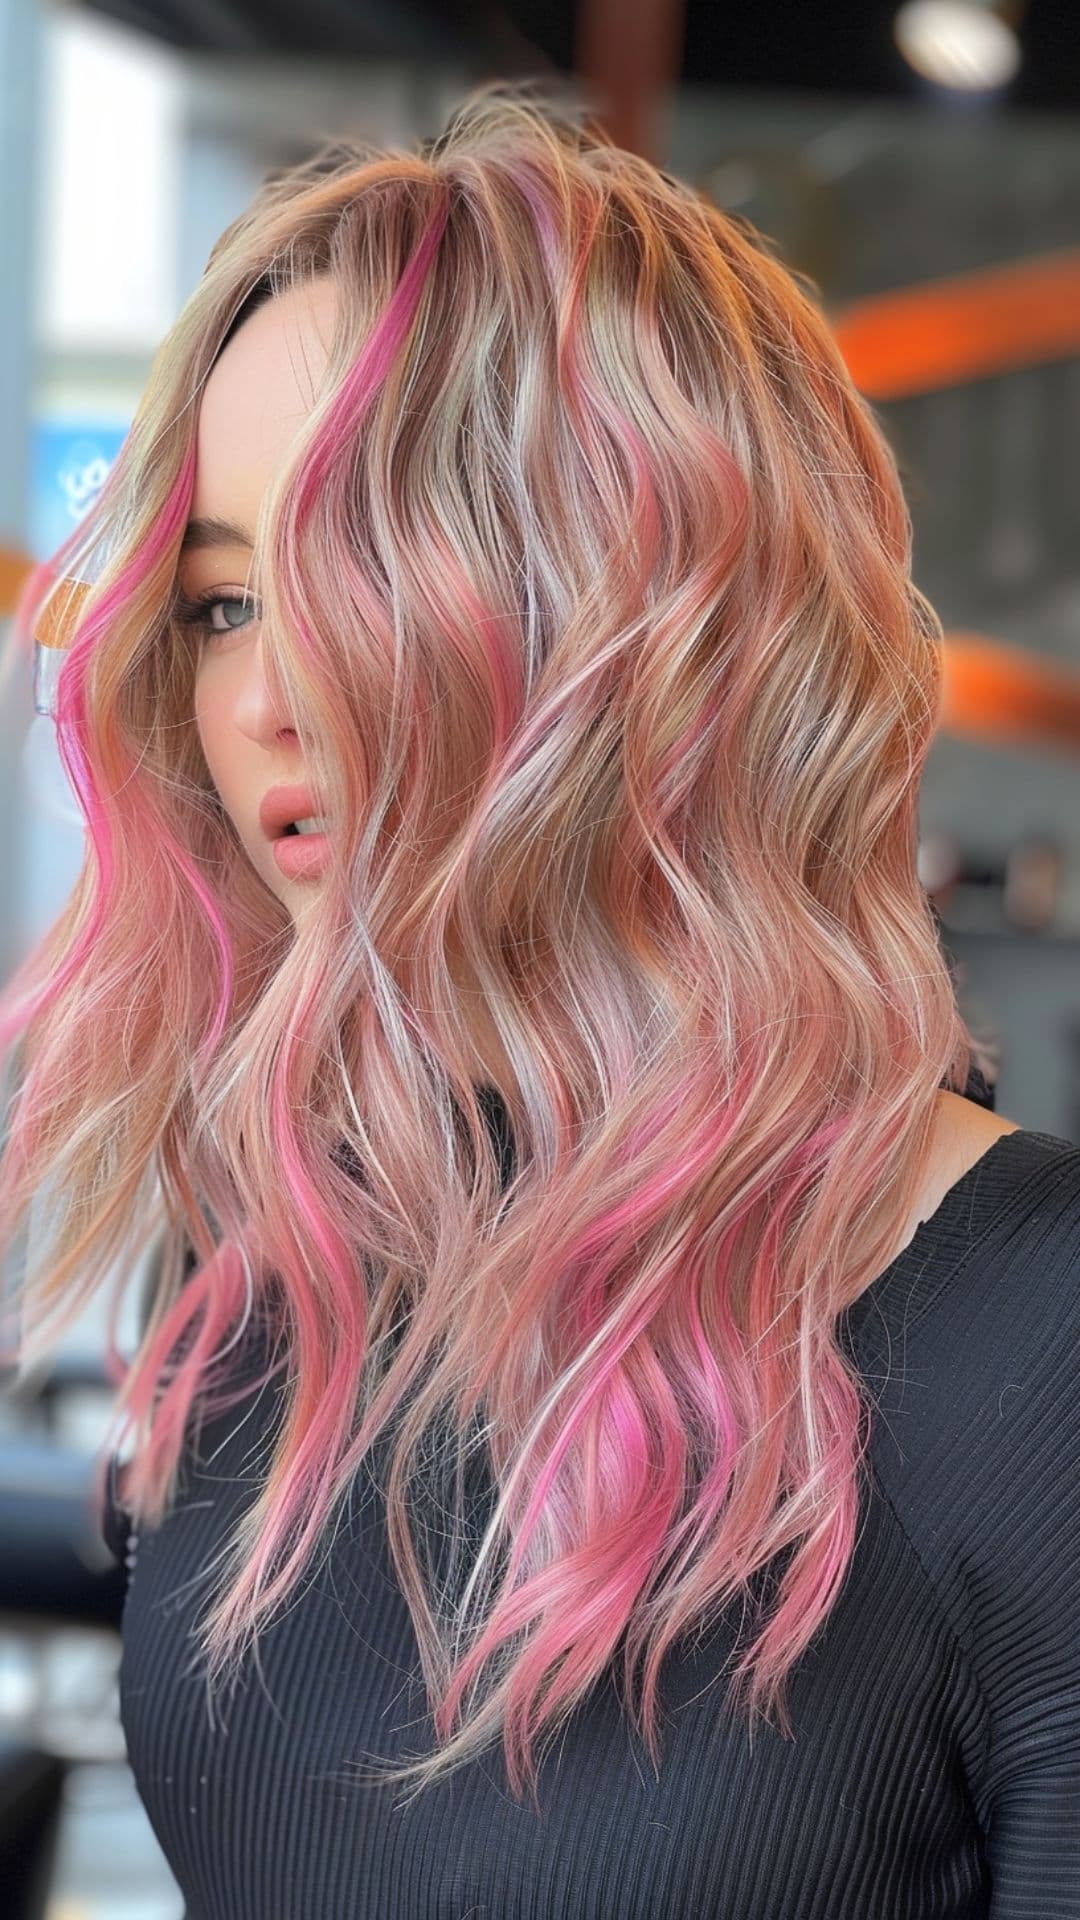 A woman modelling a pastel pink highlights.